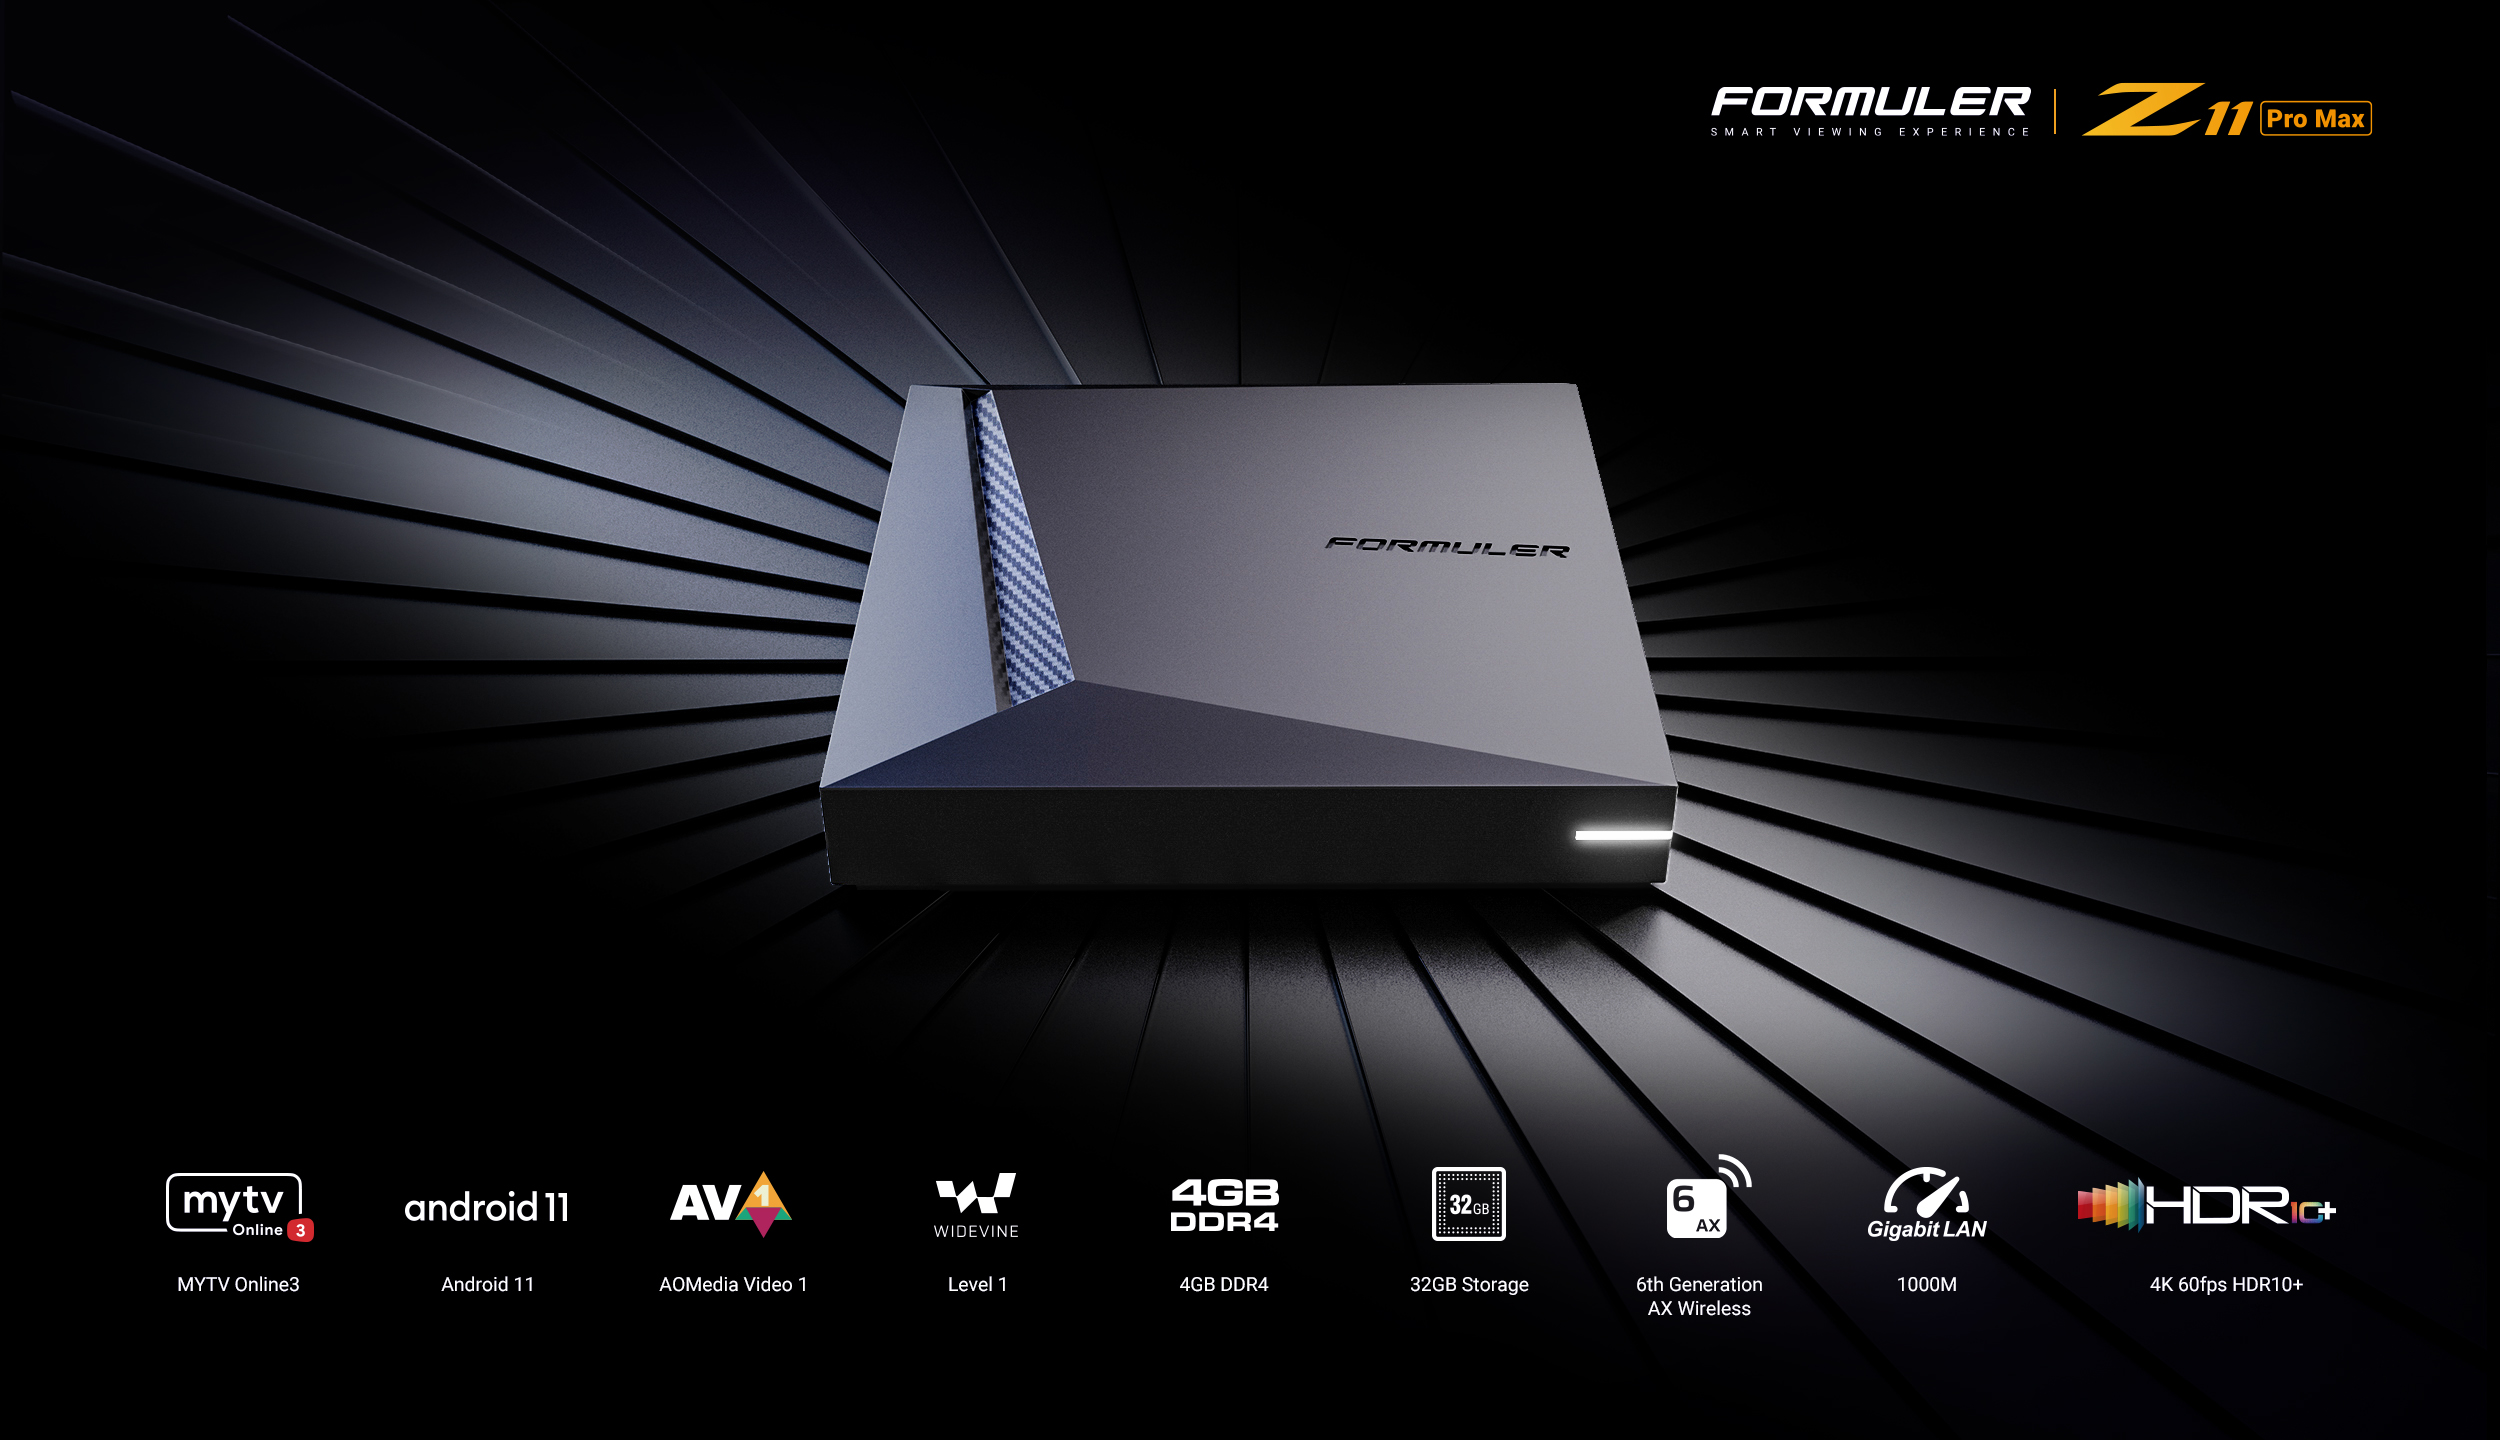 Top of the range box from Formuler Z11 Pro Max BT 1